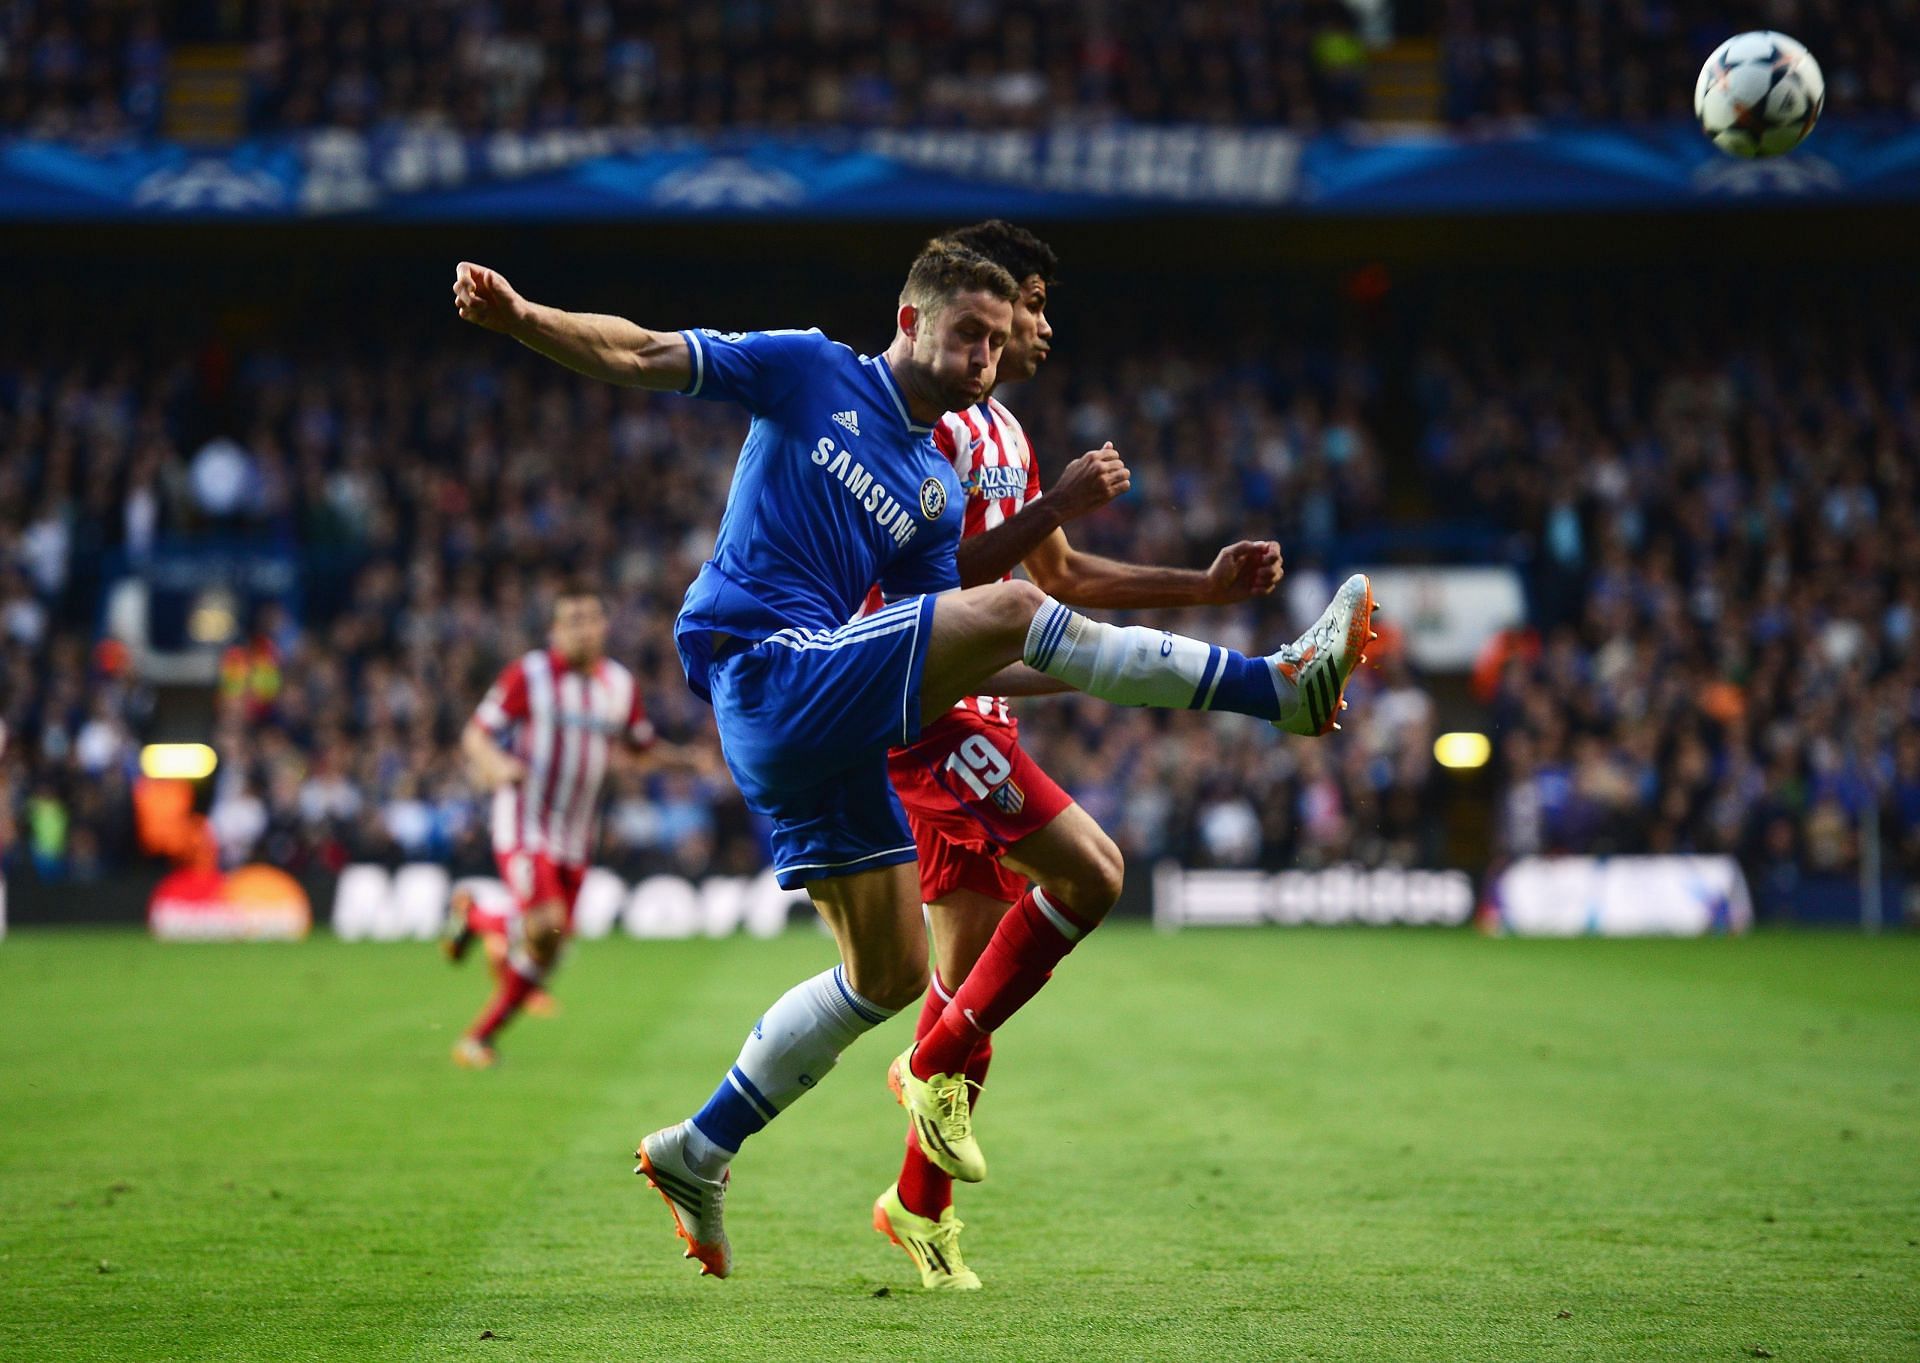 Costa played for both Chelsea and Atletico Madrid